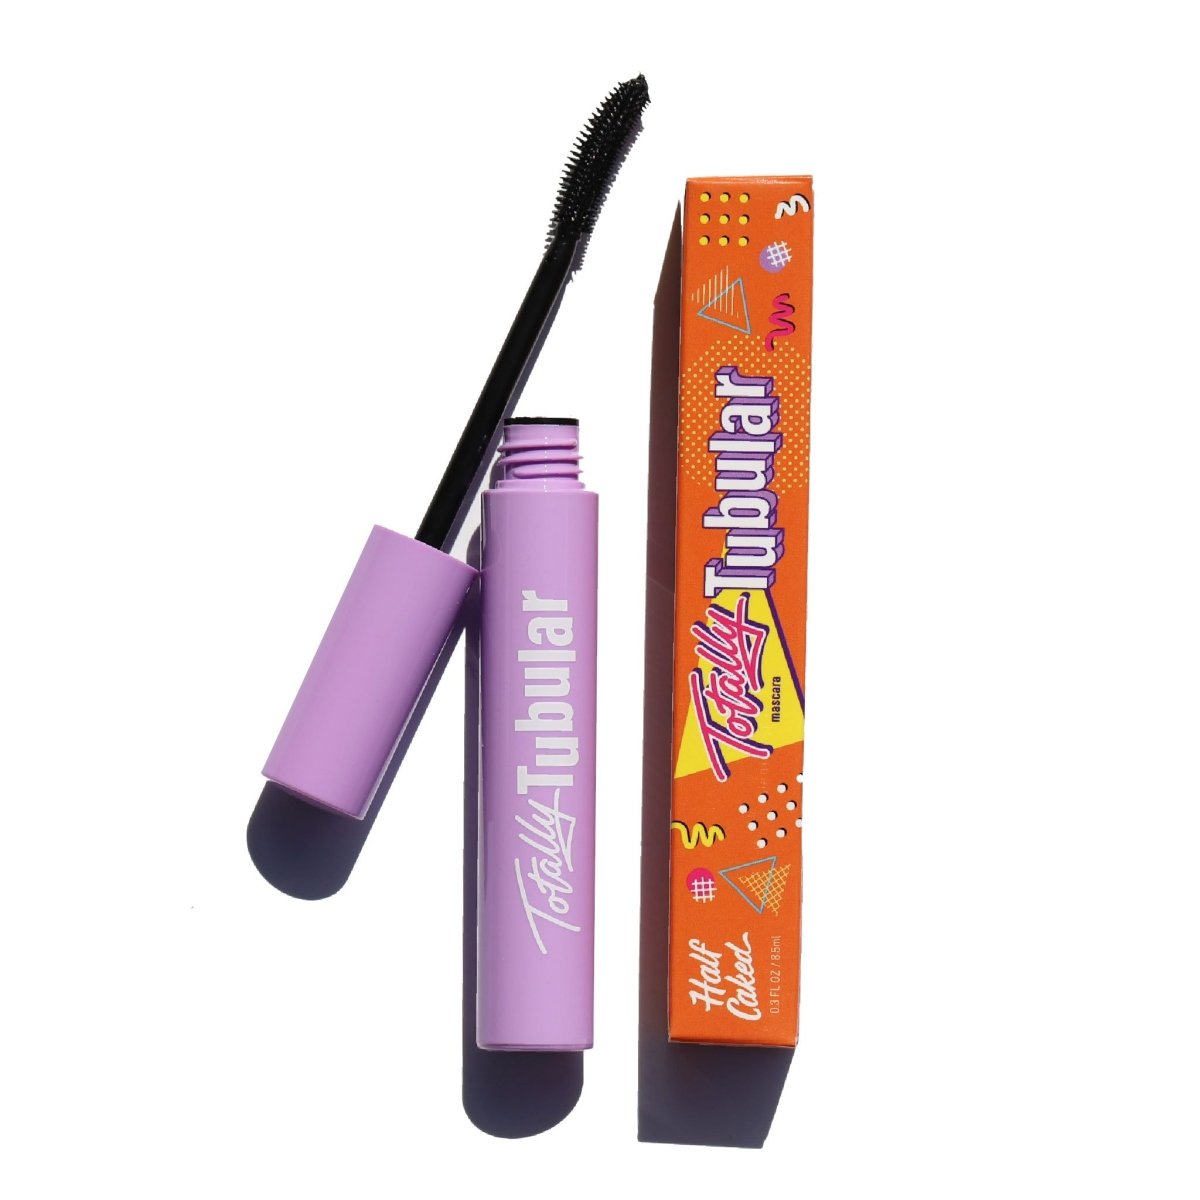 open purple mascara tube with black plastic curved applicator and orange box - totally tubular bundle, the ultimate - half caked makeup